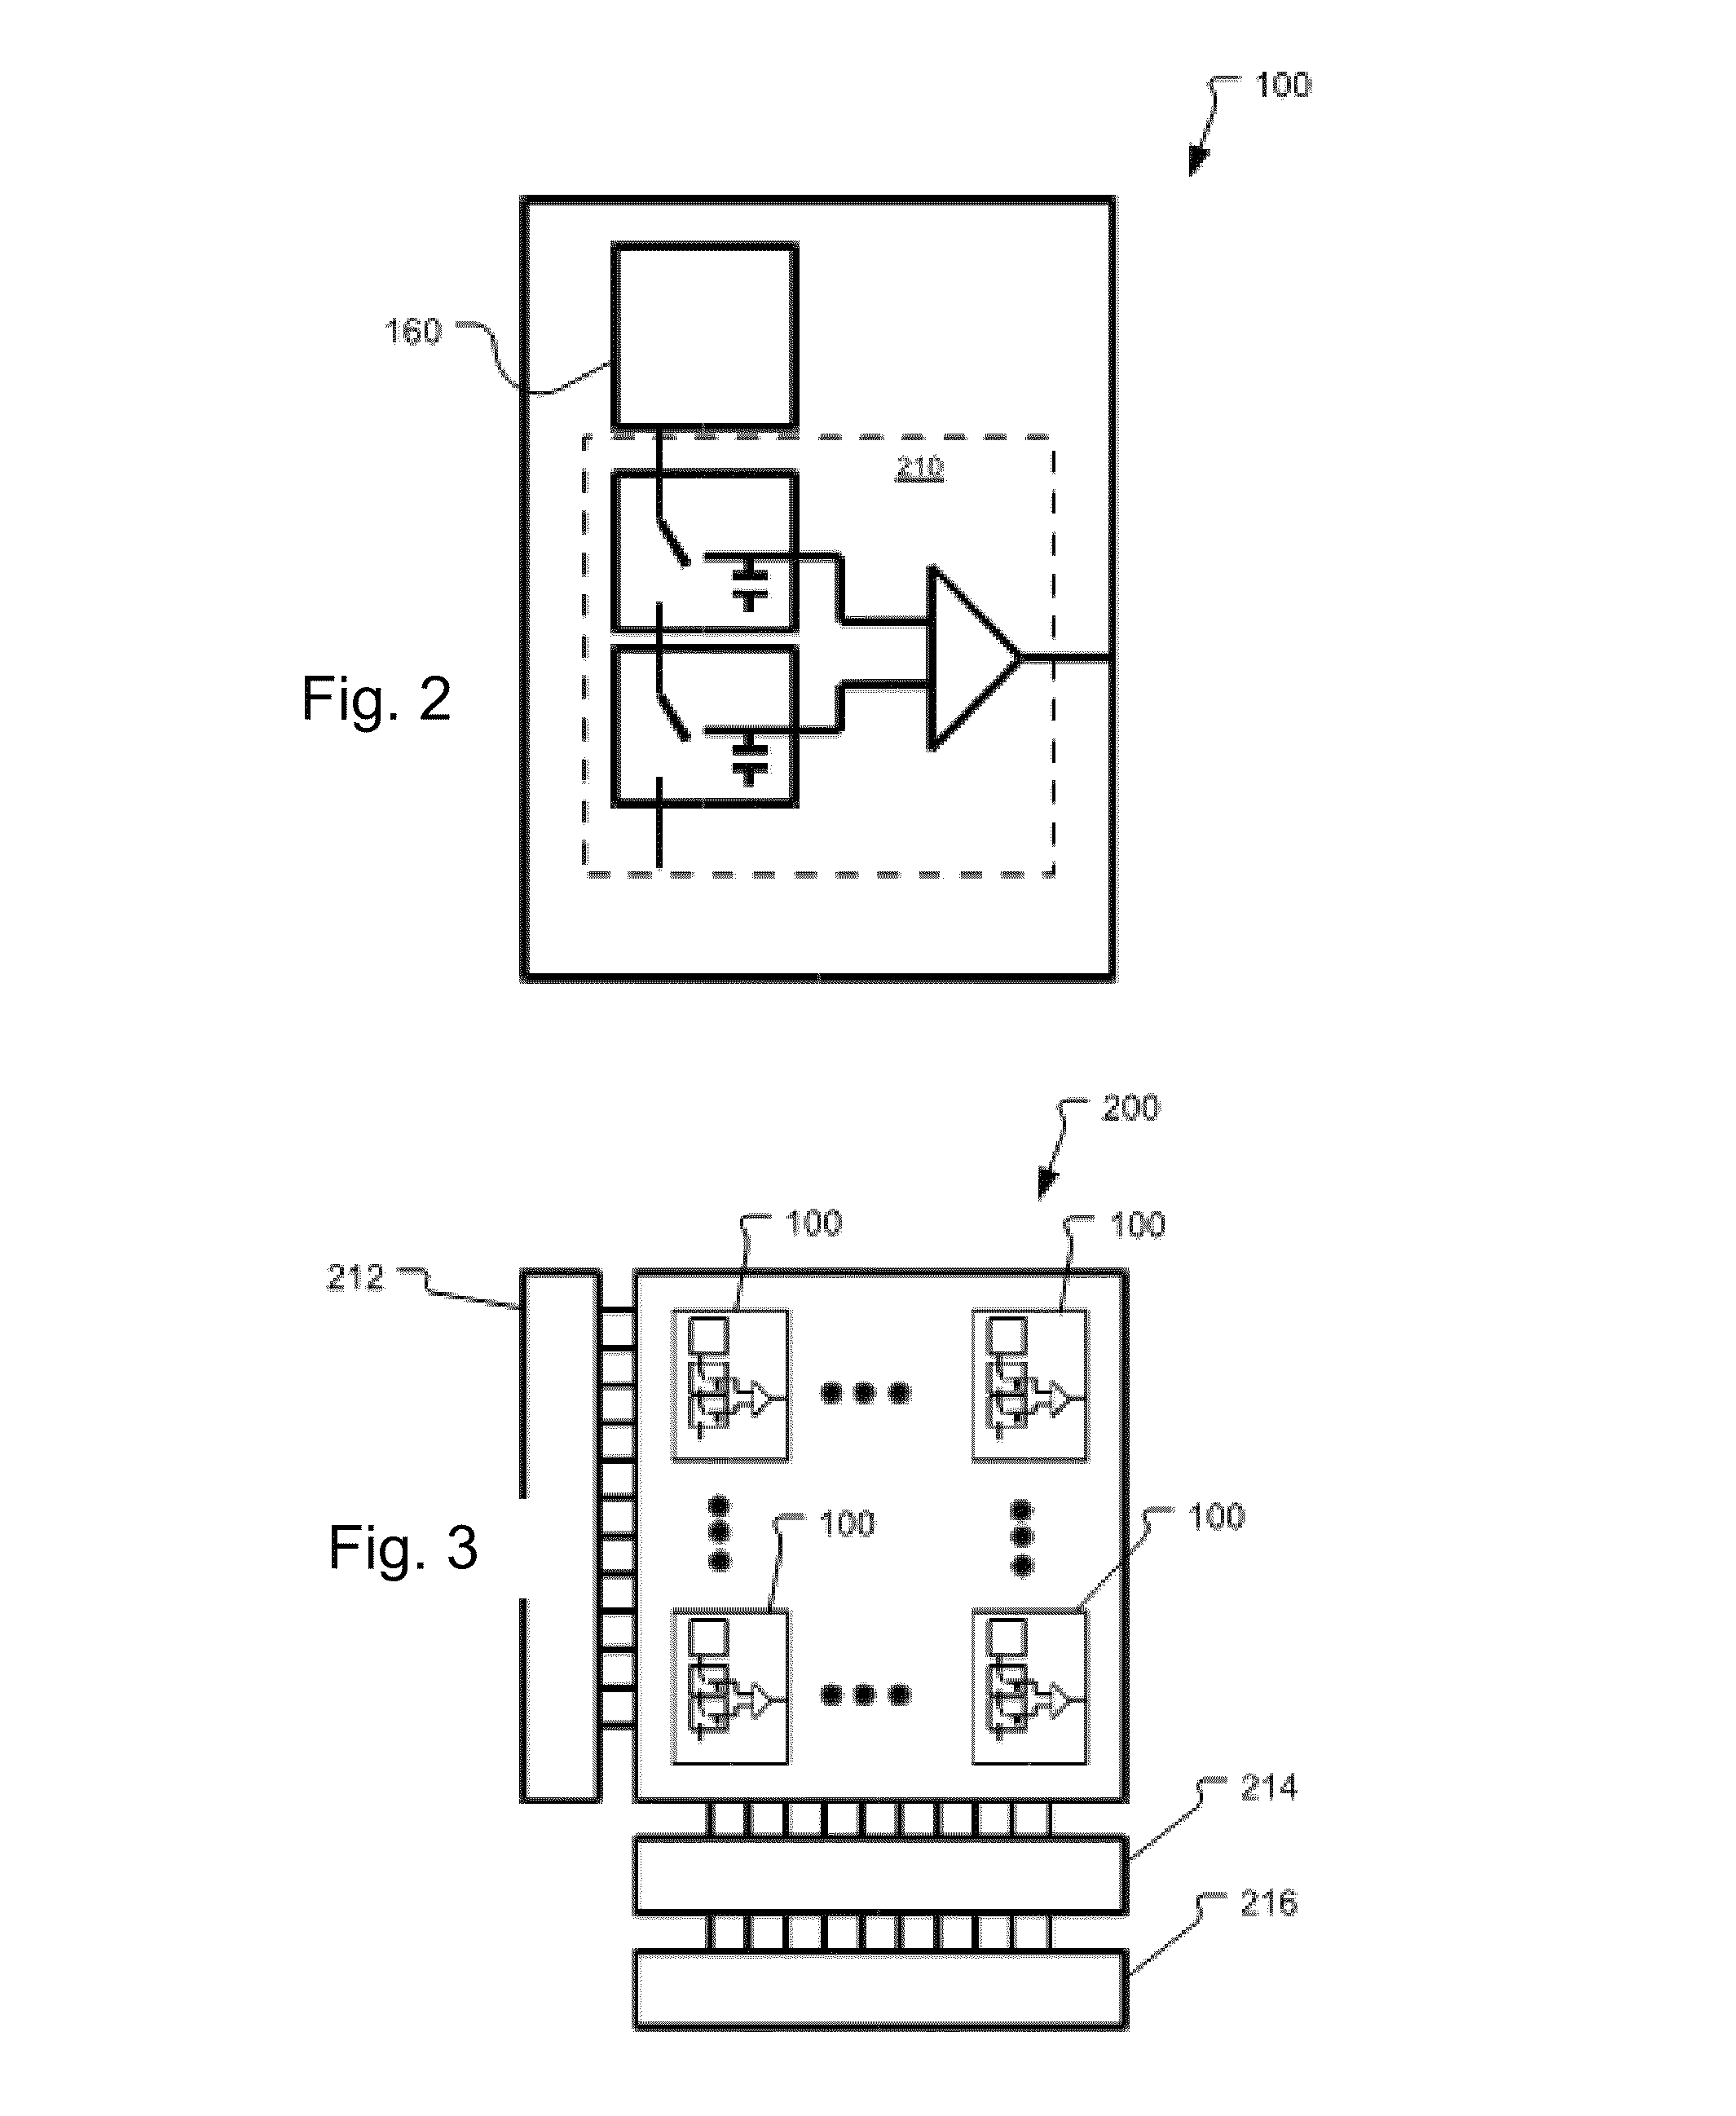 Demodulation pixel with daisy chain charge storage sites and method of operation therefor